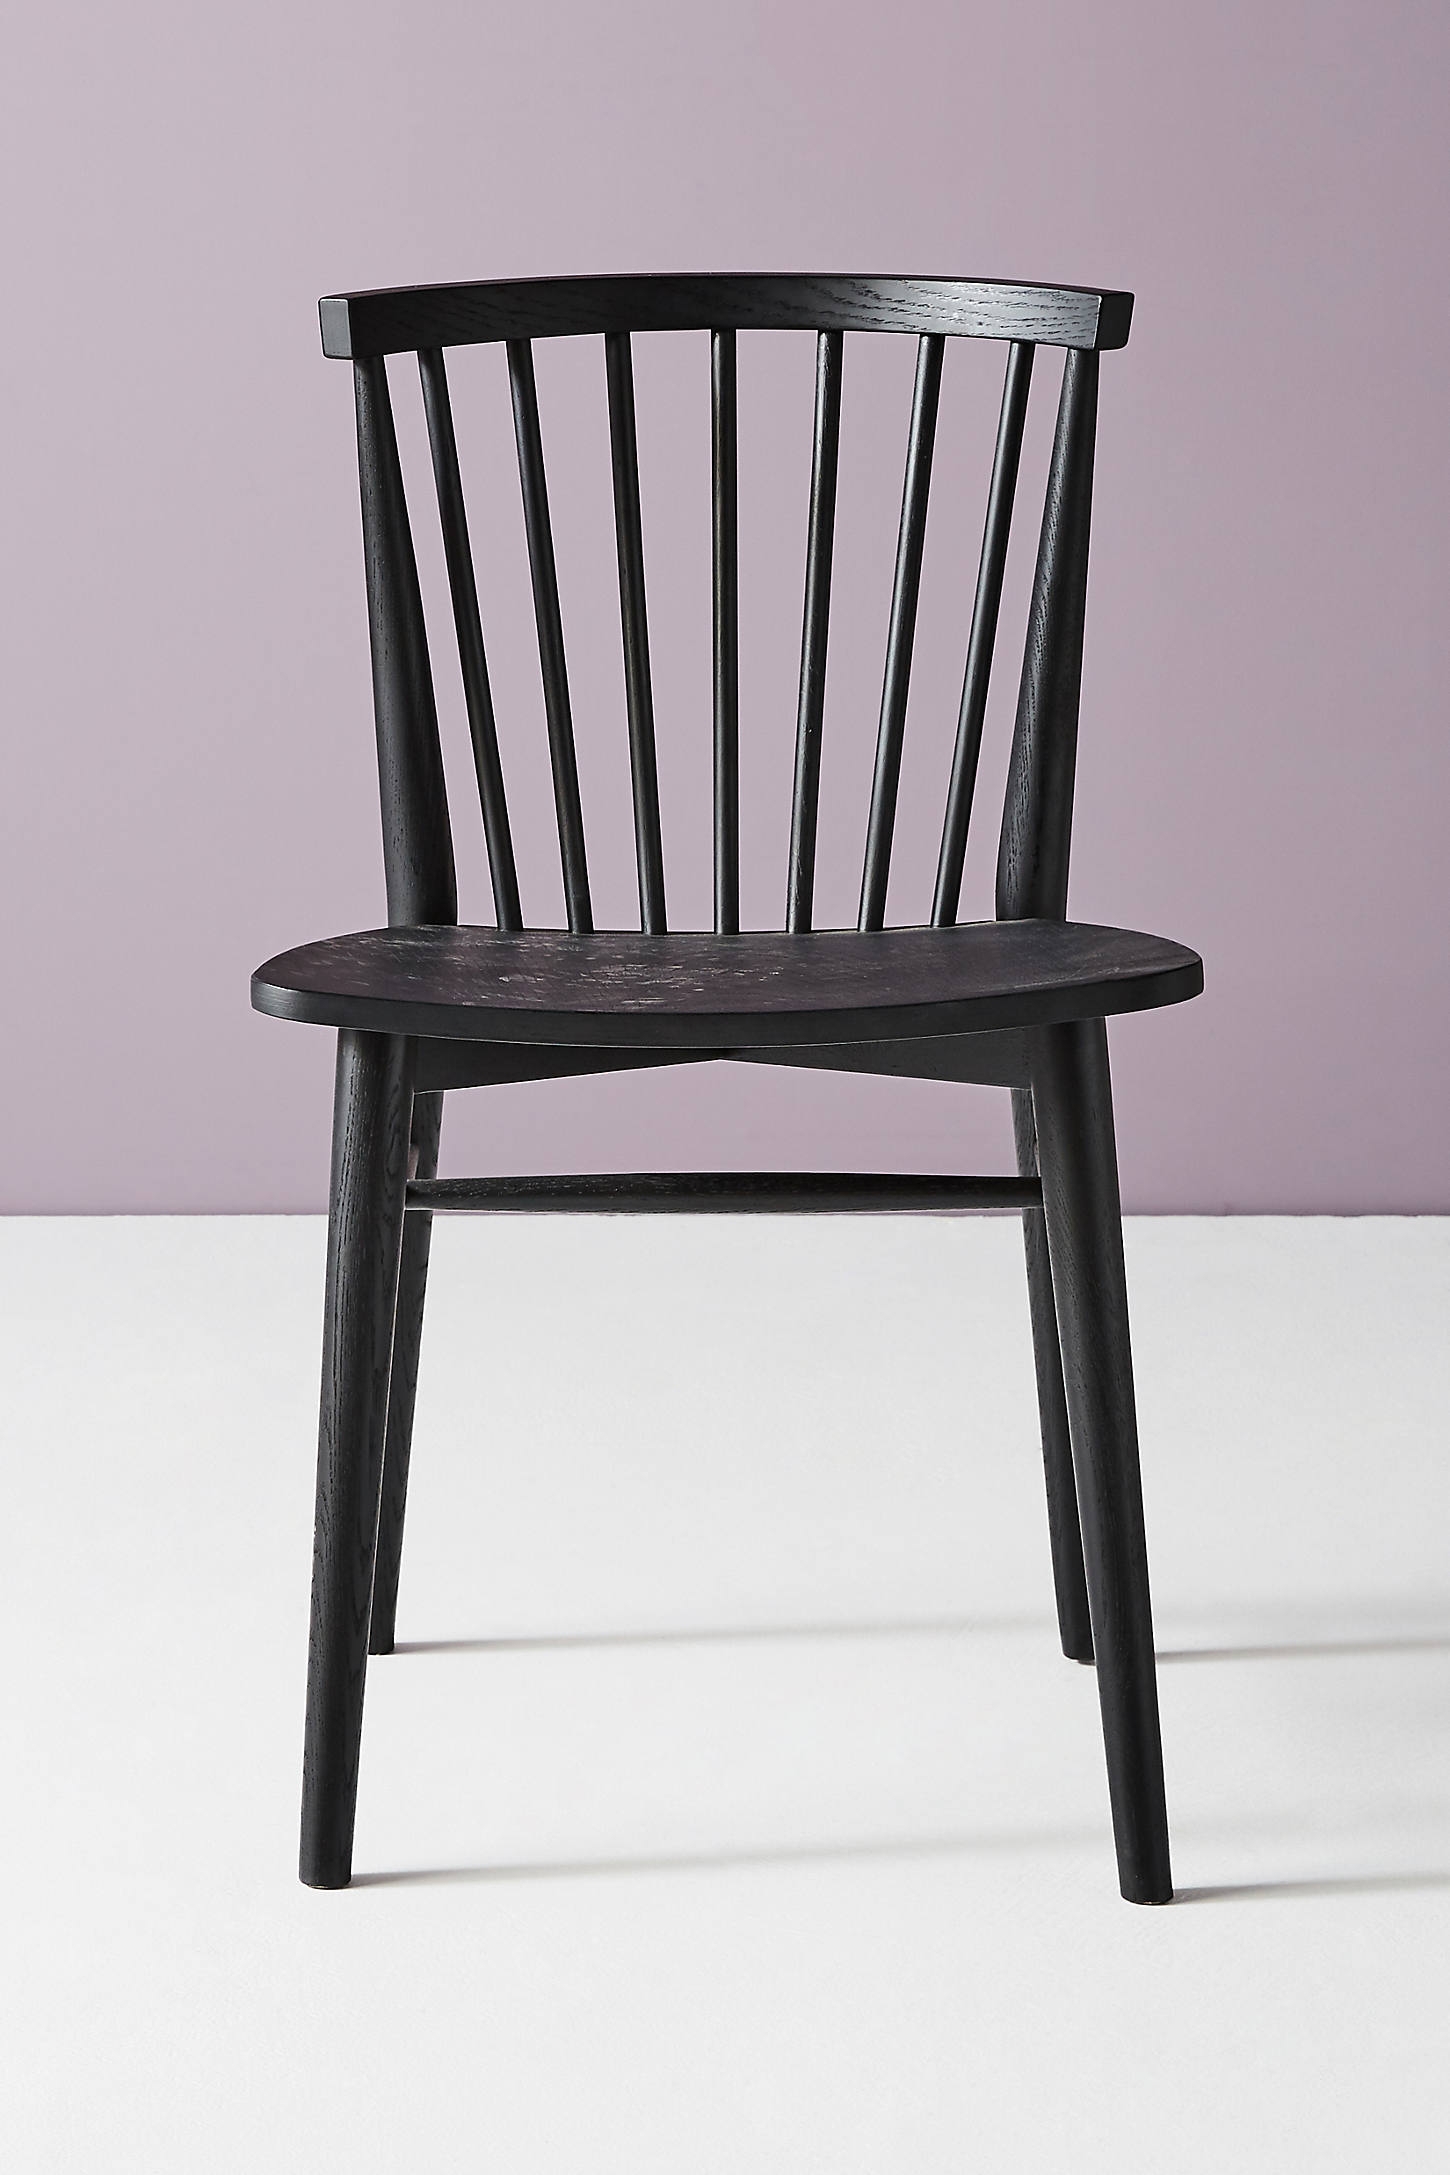 Remnick Chair - Image 0